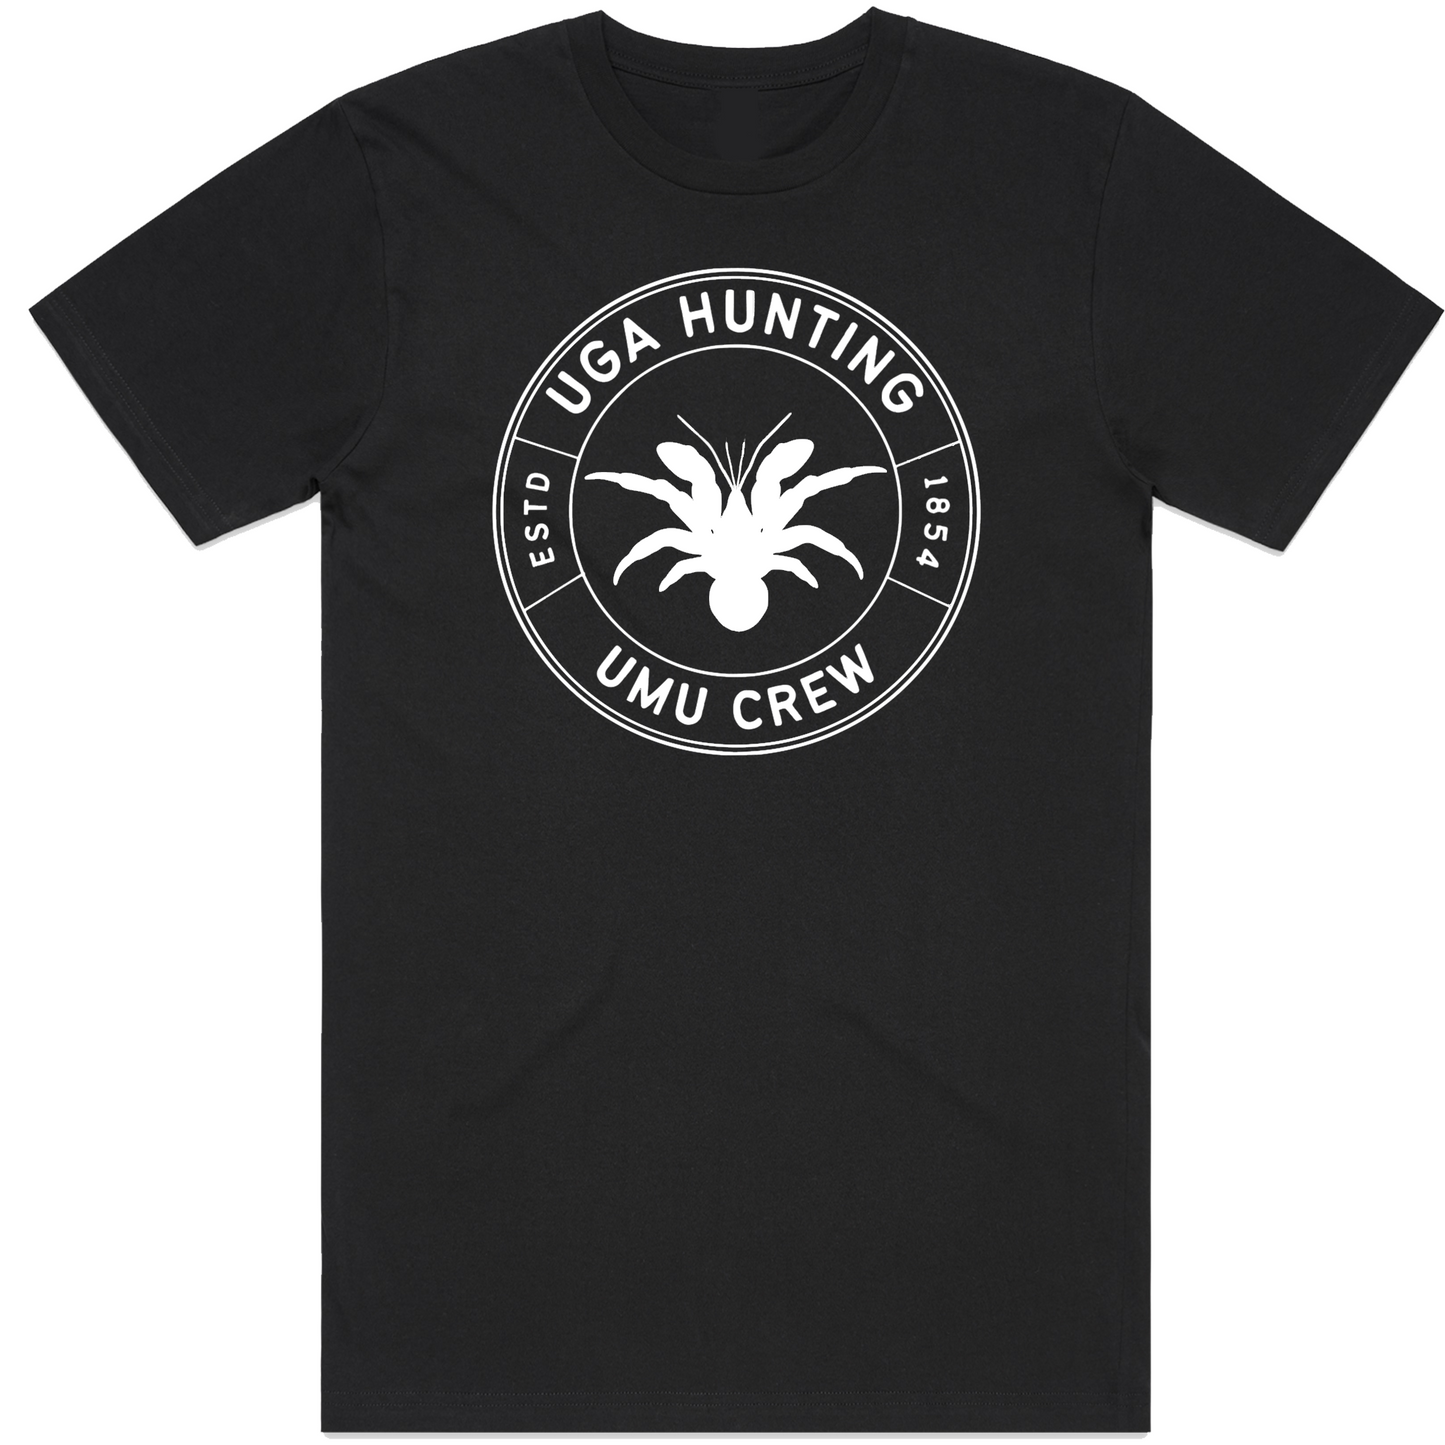 Uga hunting t-shirt design. part of the umu crew collection. white design on a black t-shirt. features a coconut crab or Uga in Niue.